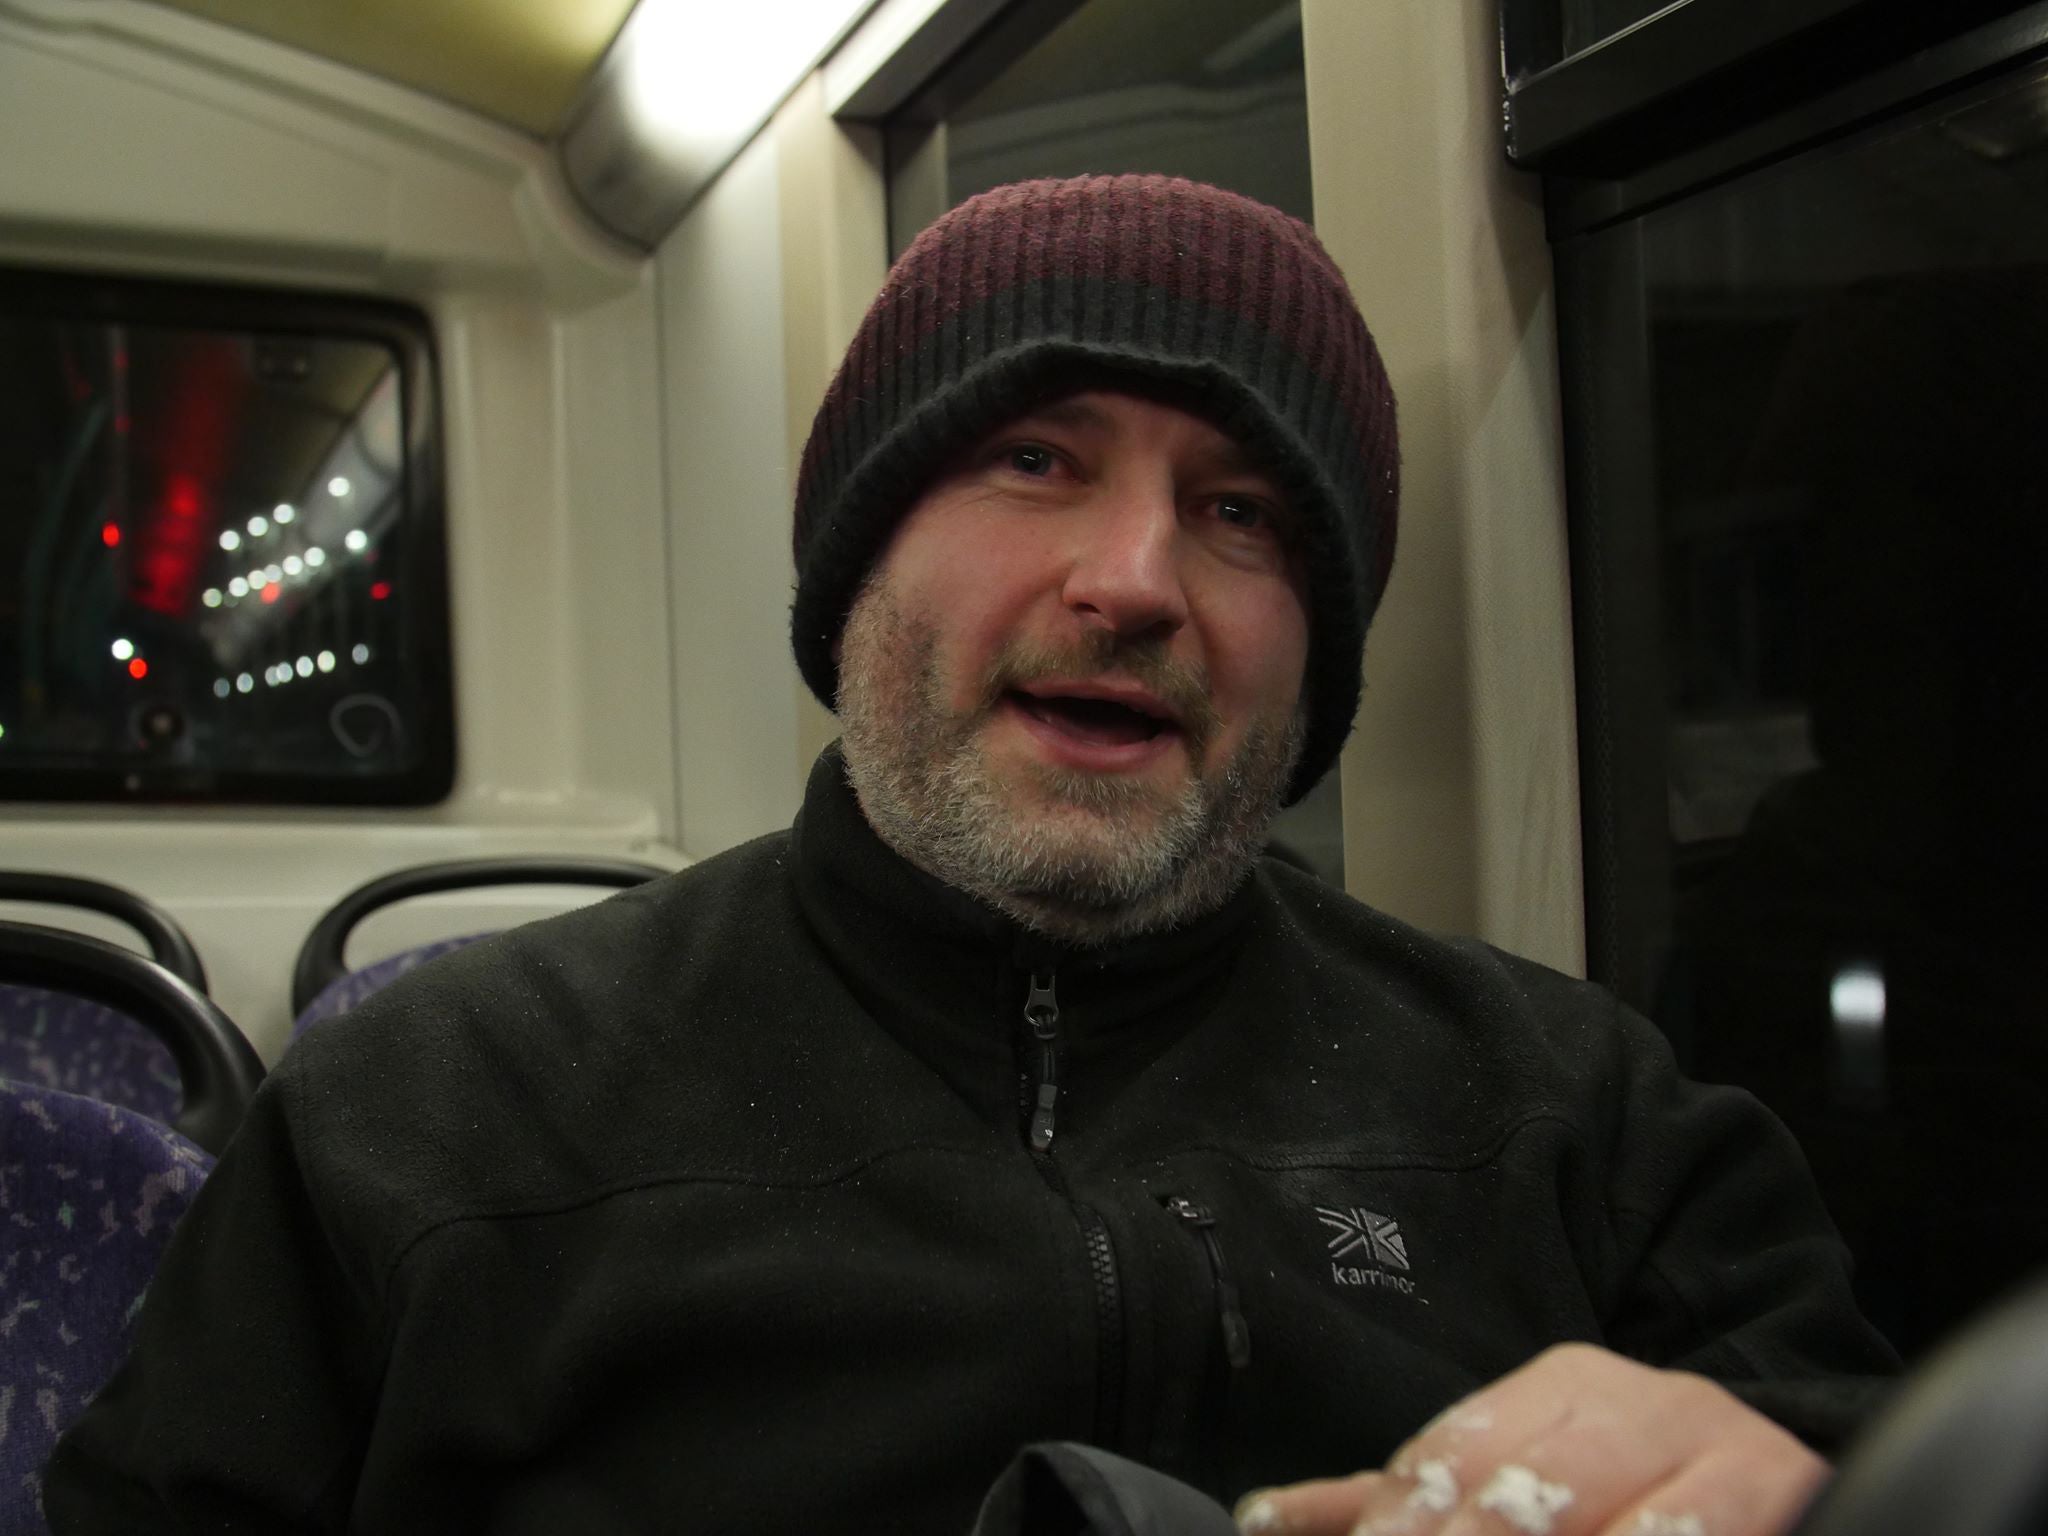 Gaz, 42, a night bus sleeper featured in End of the Line